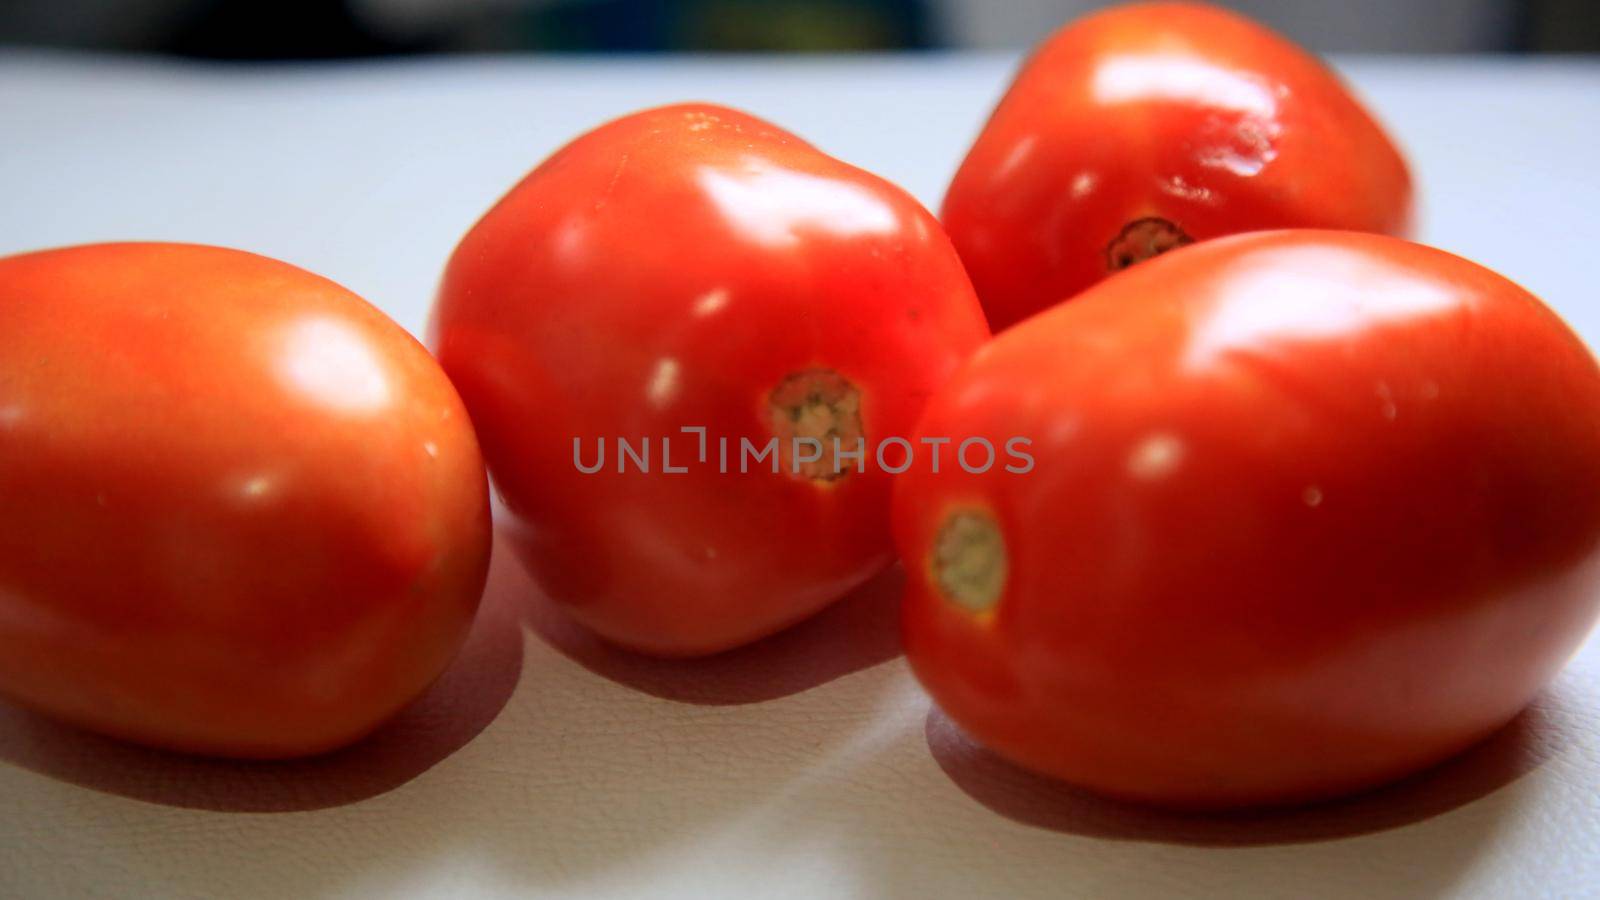 salvador, bahia / brazil - may 08, 2020: tomatoes are seen in the city of Salvador.

